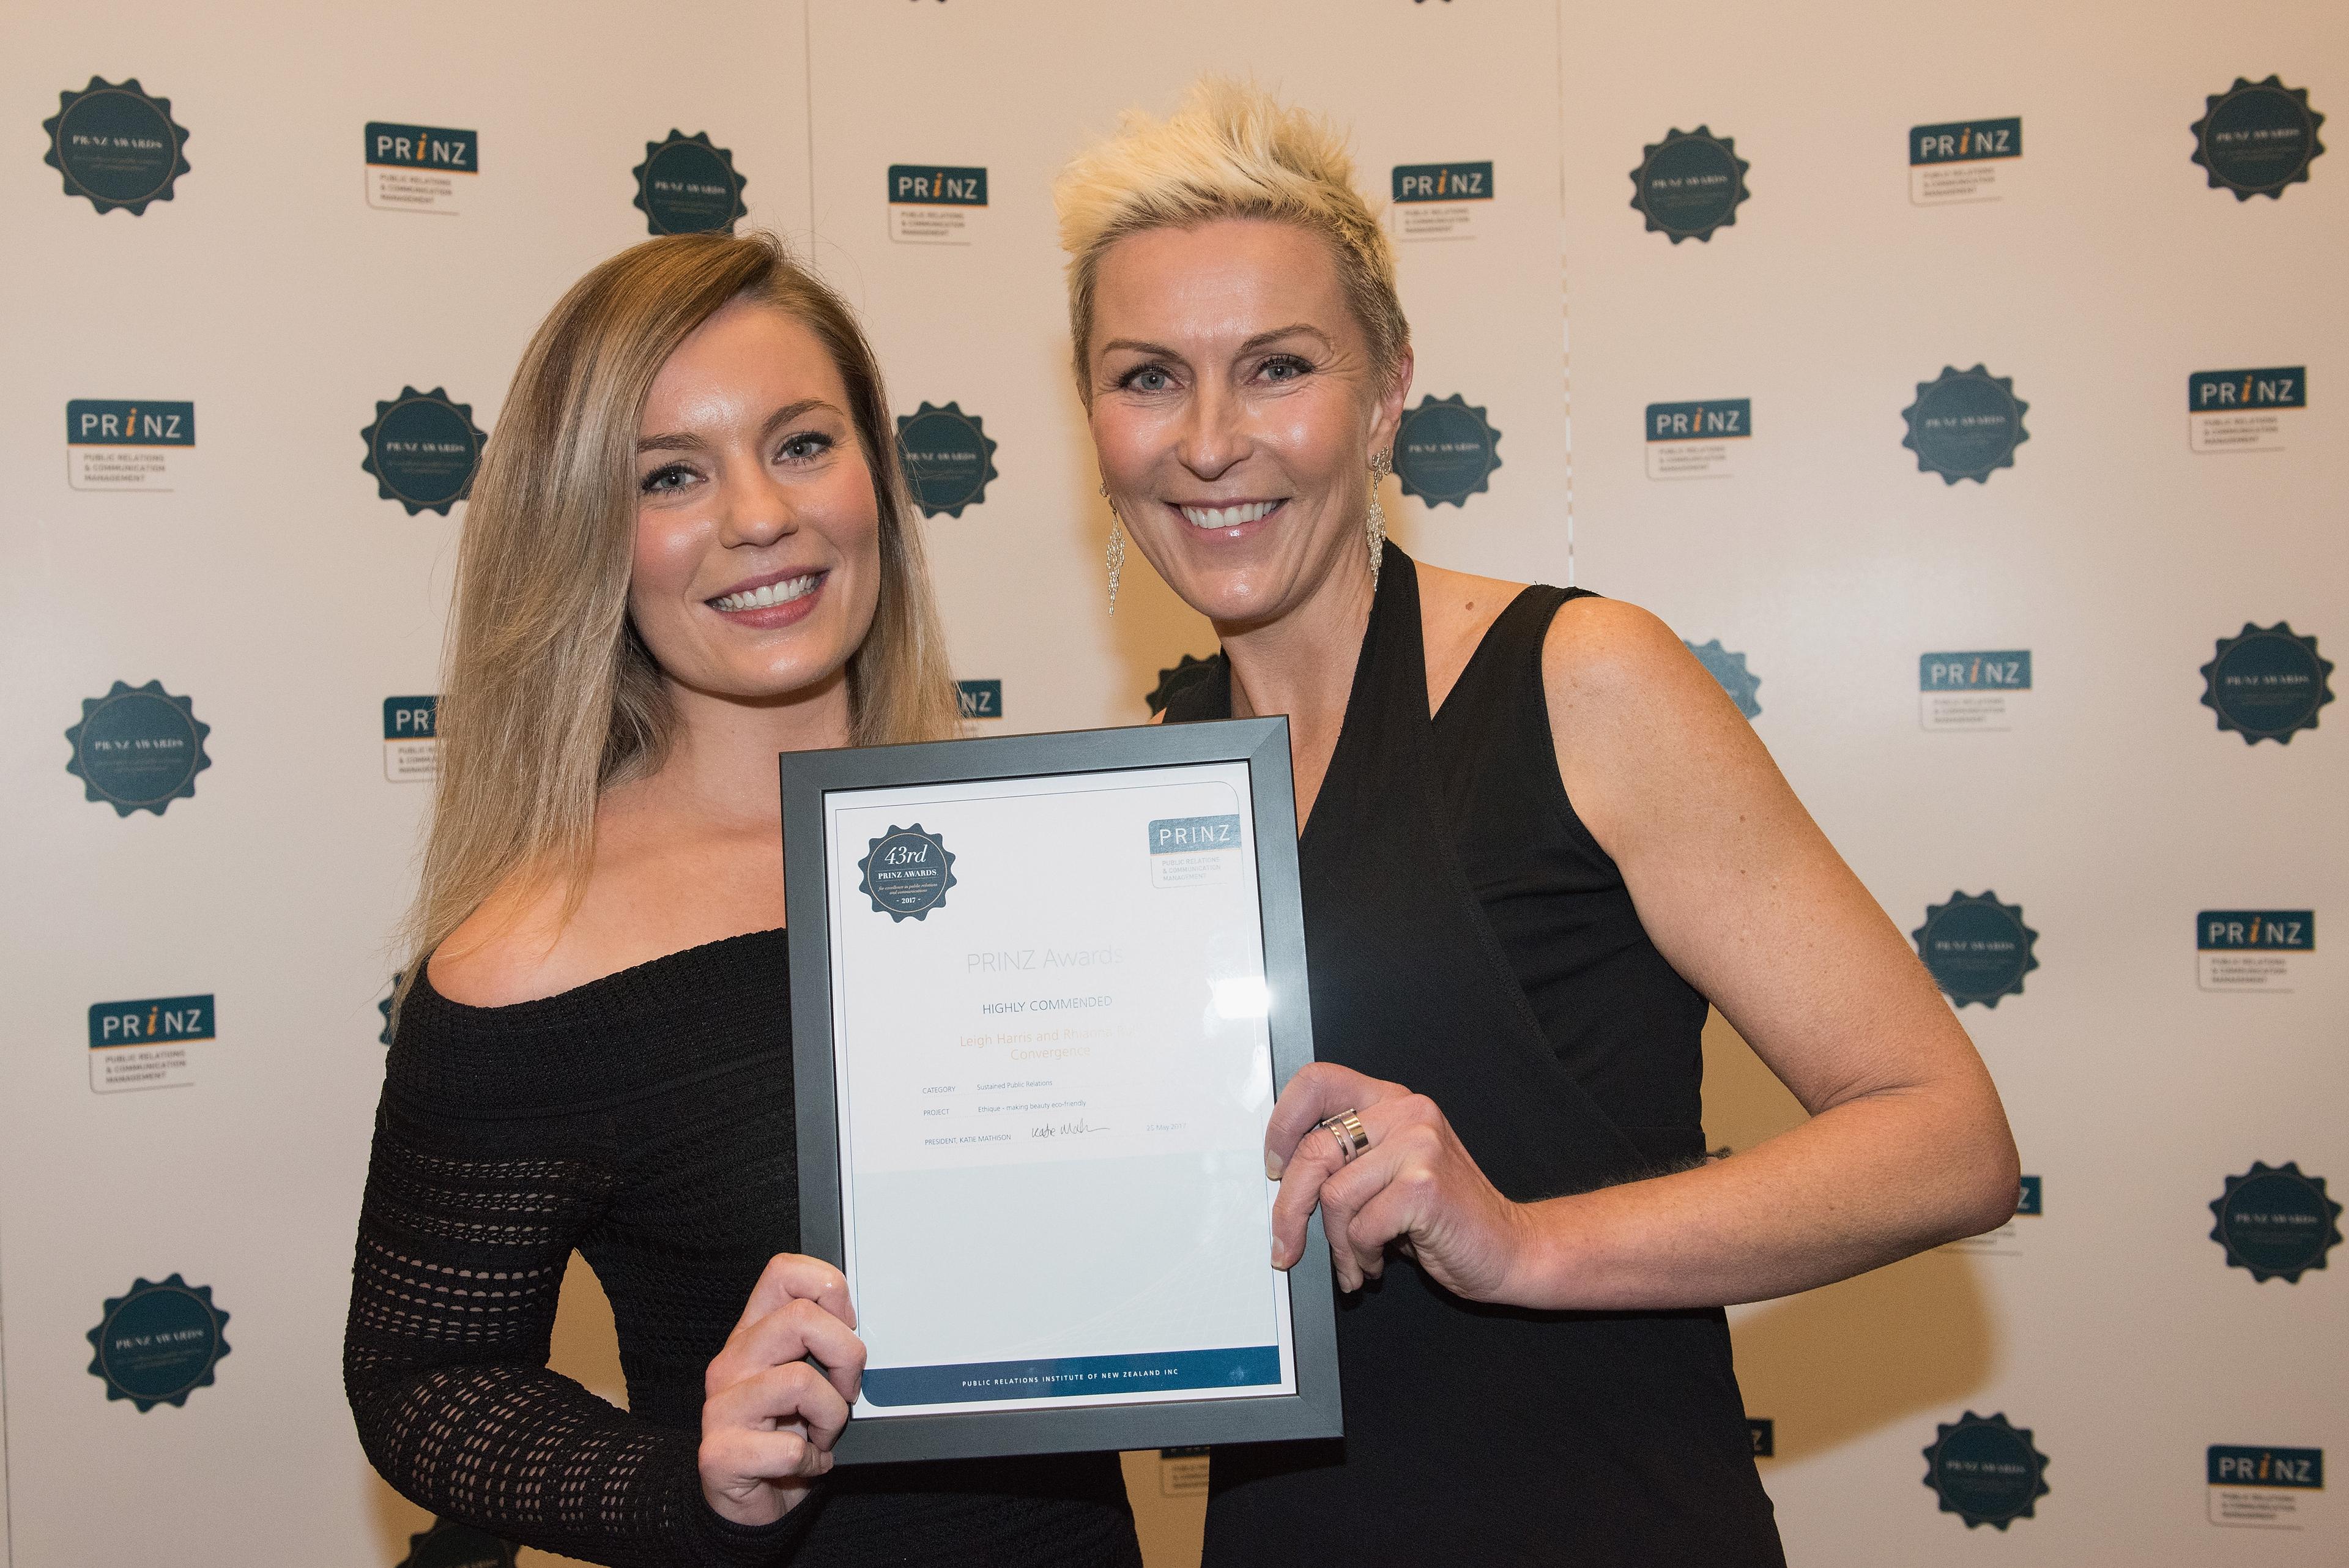 Highly commended for sharing story of ethical beauty brand